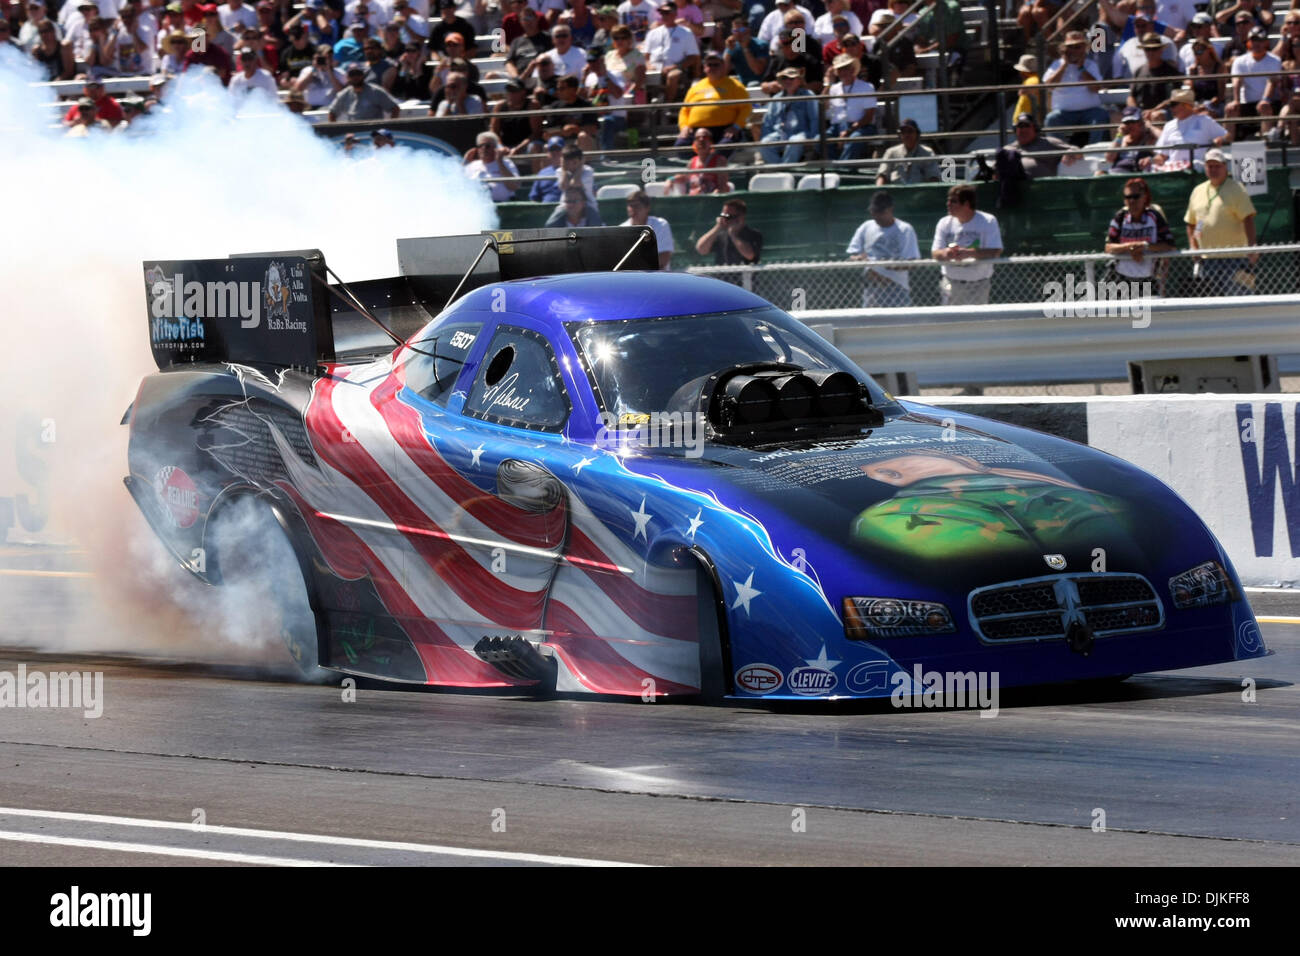 Sept. 5, 2010 - Indianapolis, Indiana, United States of America - 05 September2010: Melanie Troxel does a burnout. The U.S. Nationals were held at O'Reilly Raceway Park in Indianapolis, Indiana. (Credit Image: © Alan Ashley/Southcreek Global/ZUMApress.com) Stock Photo